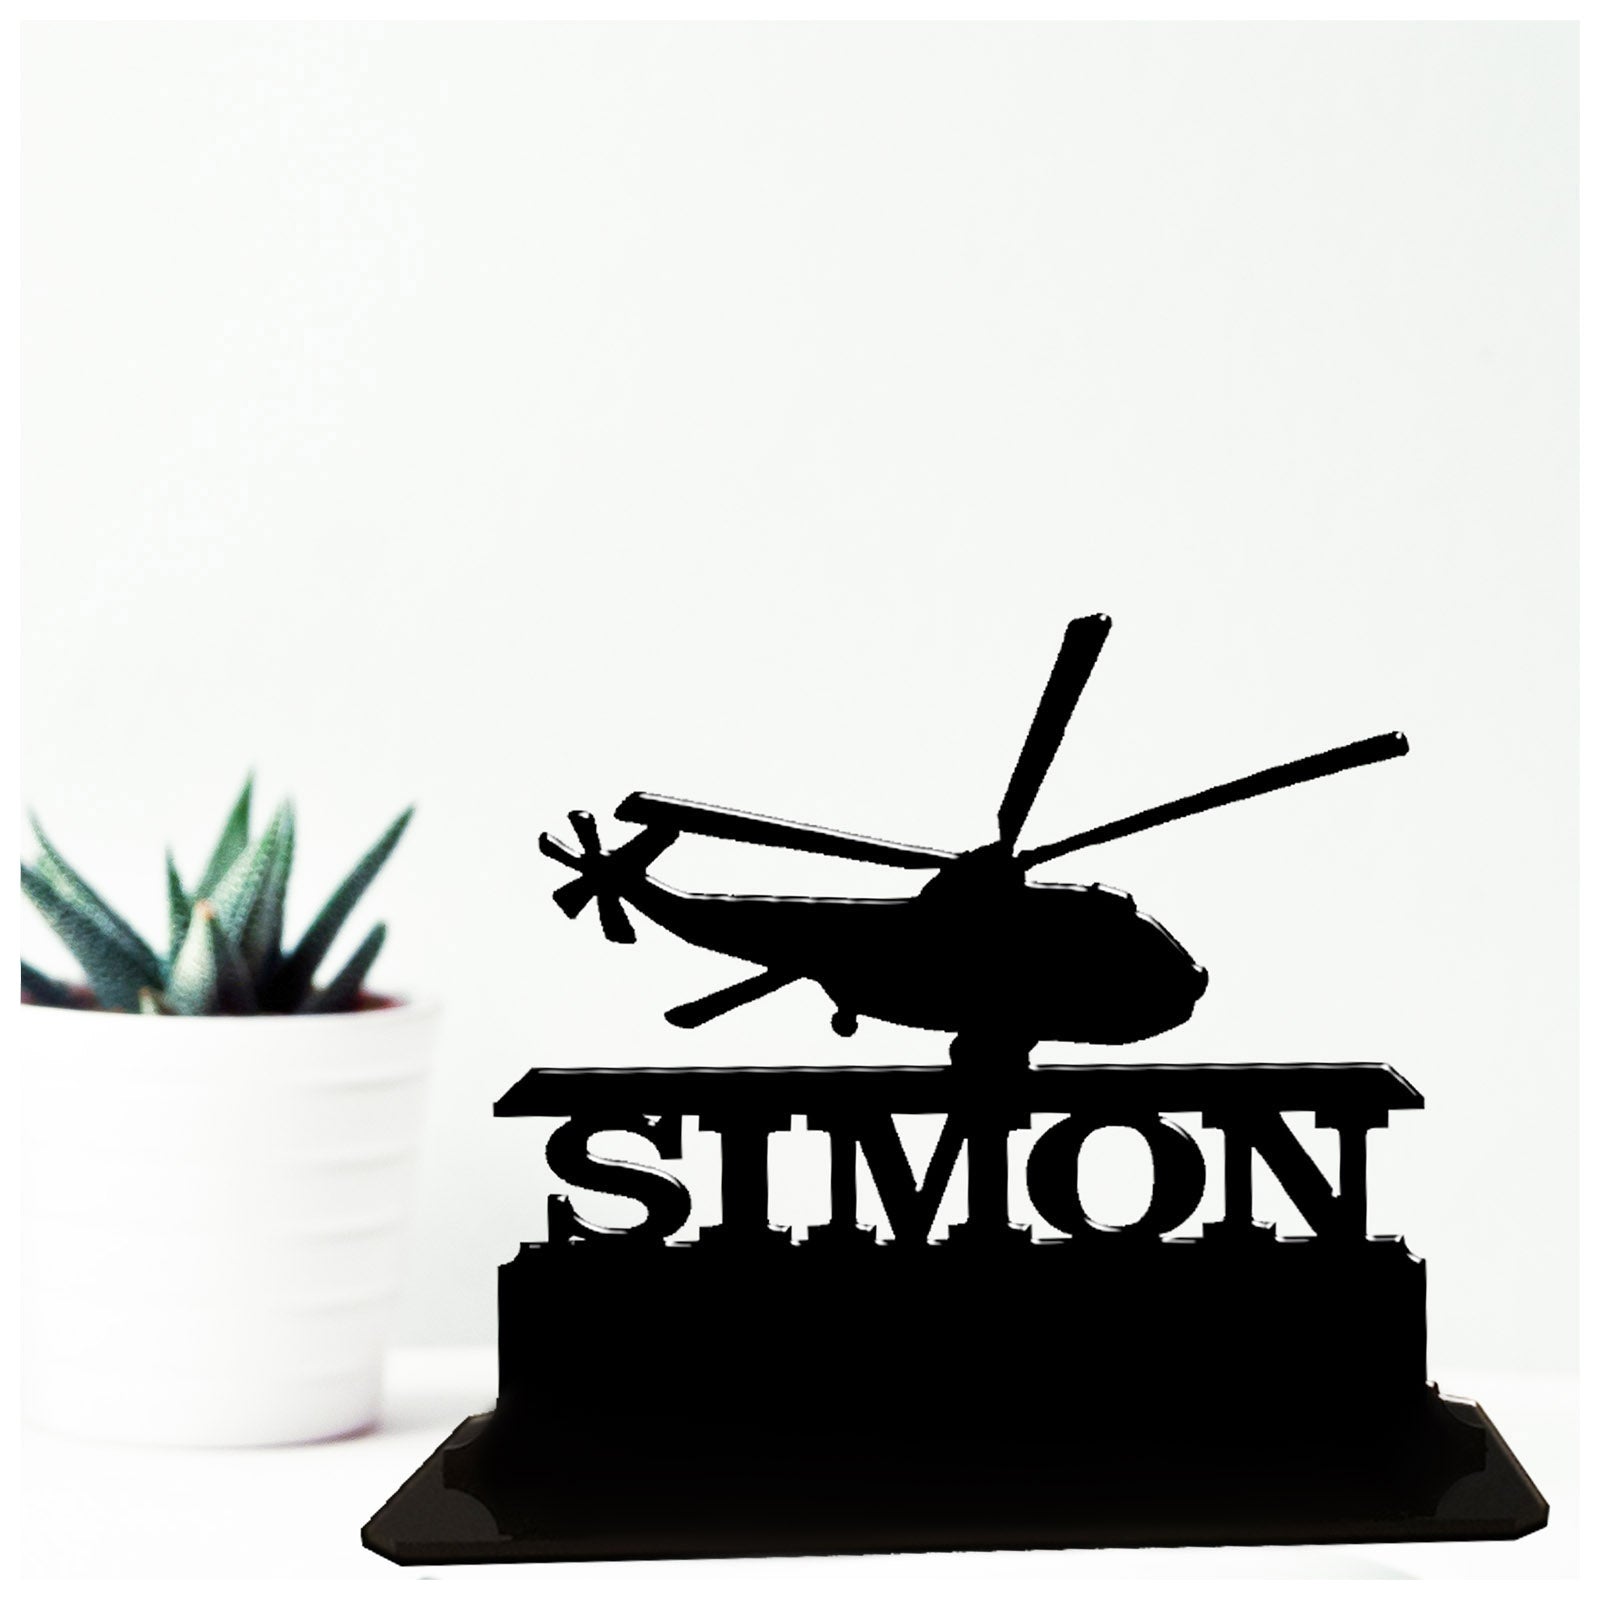 Acrylic personalised Sea King military helicopter gift ideas for helicopter pilots. Standalone keepsake ornaments.